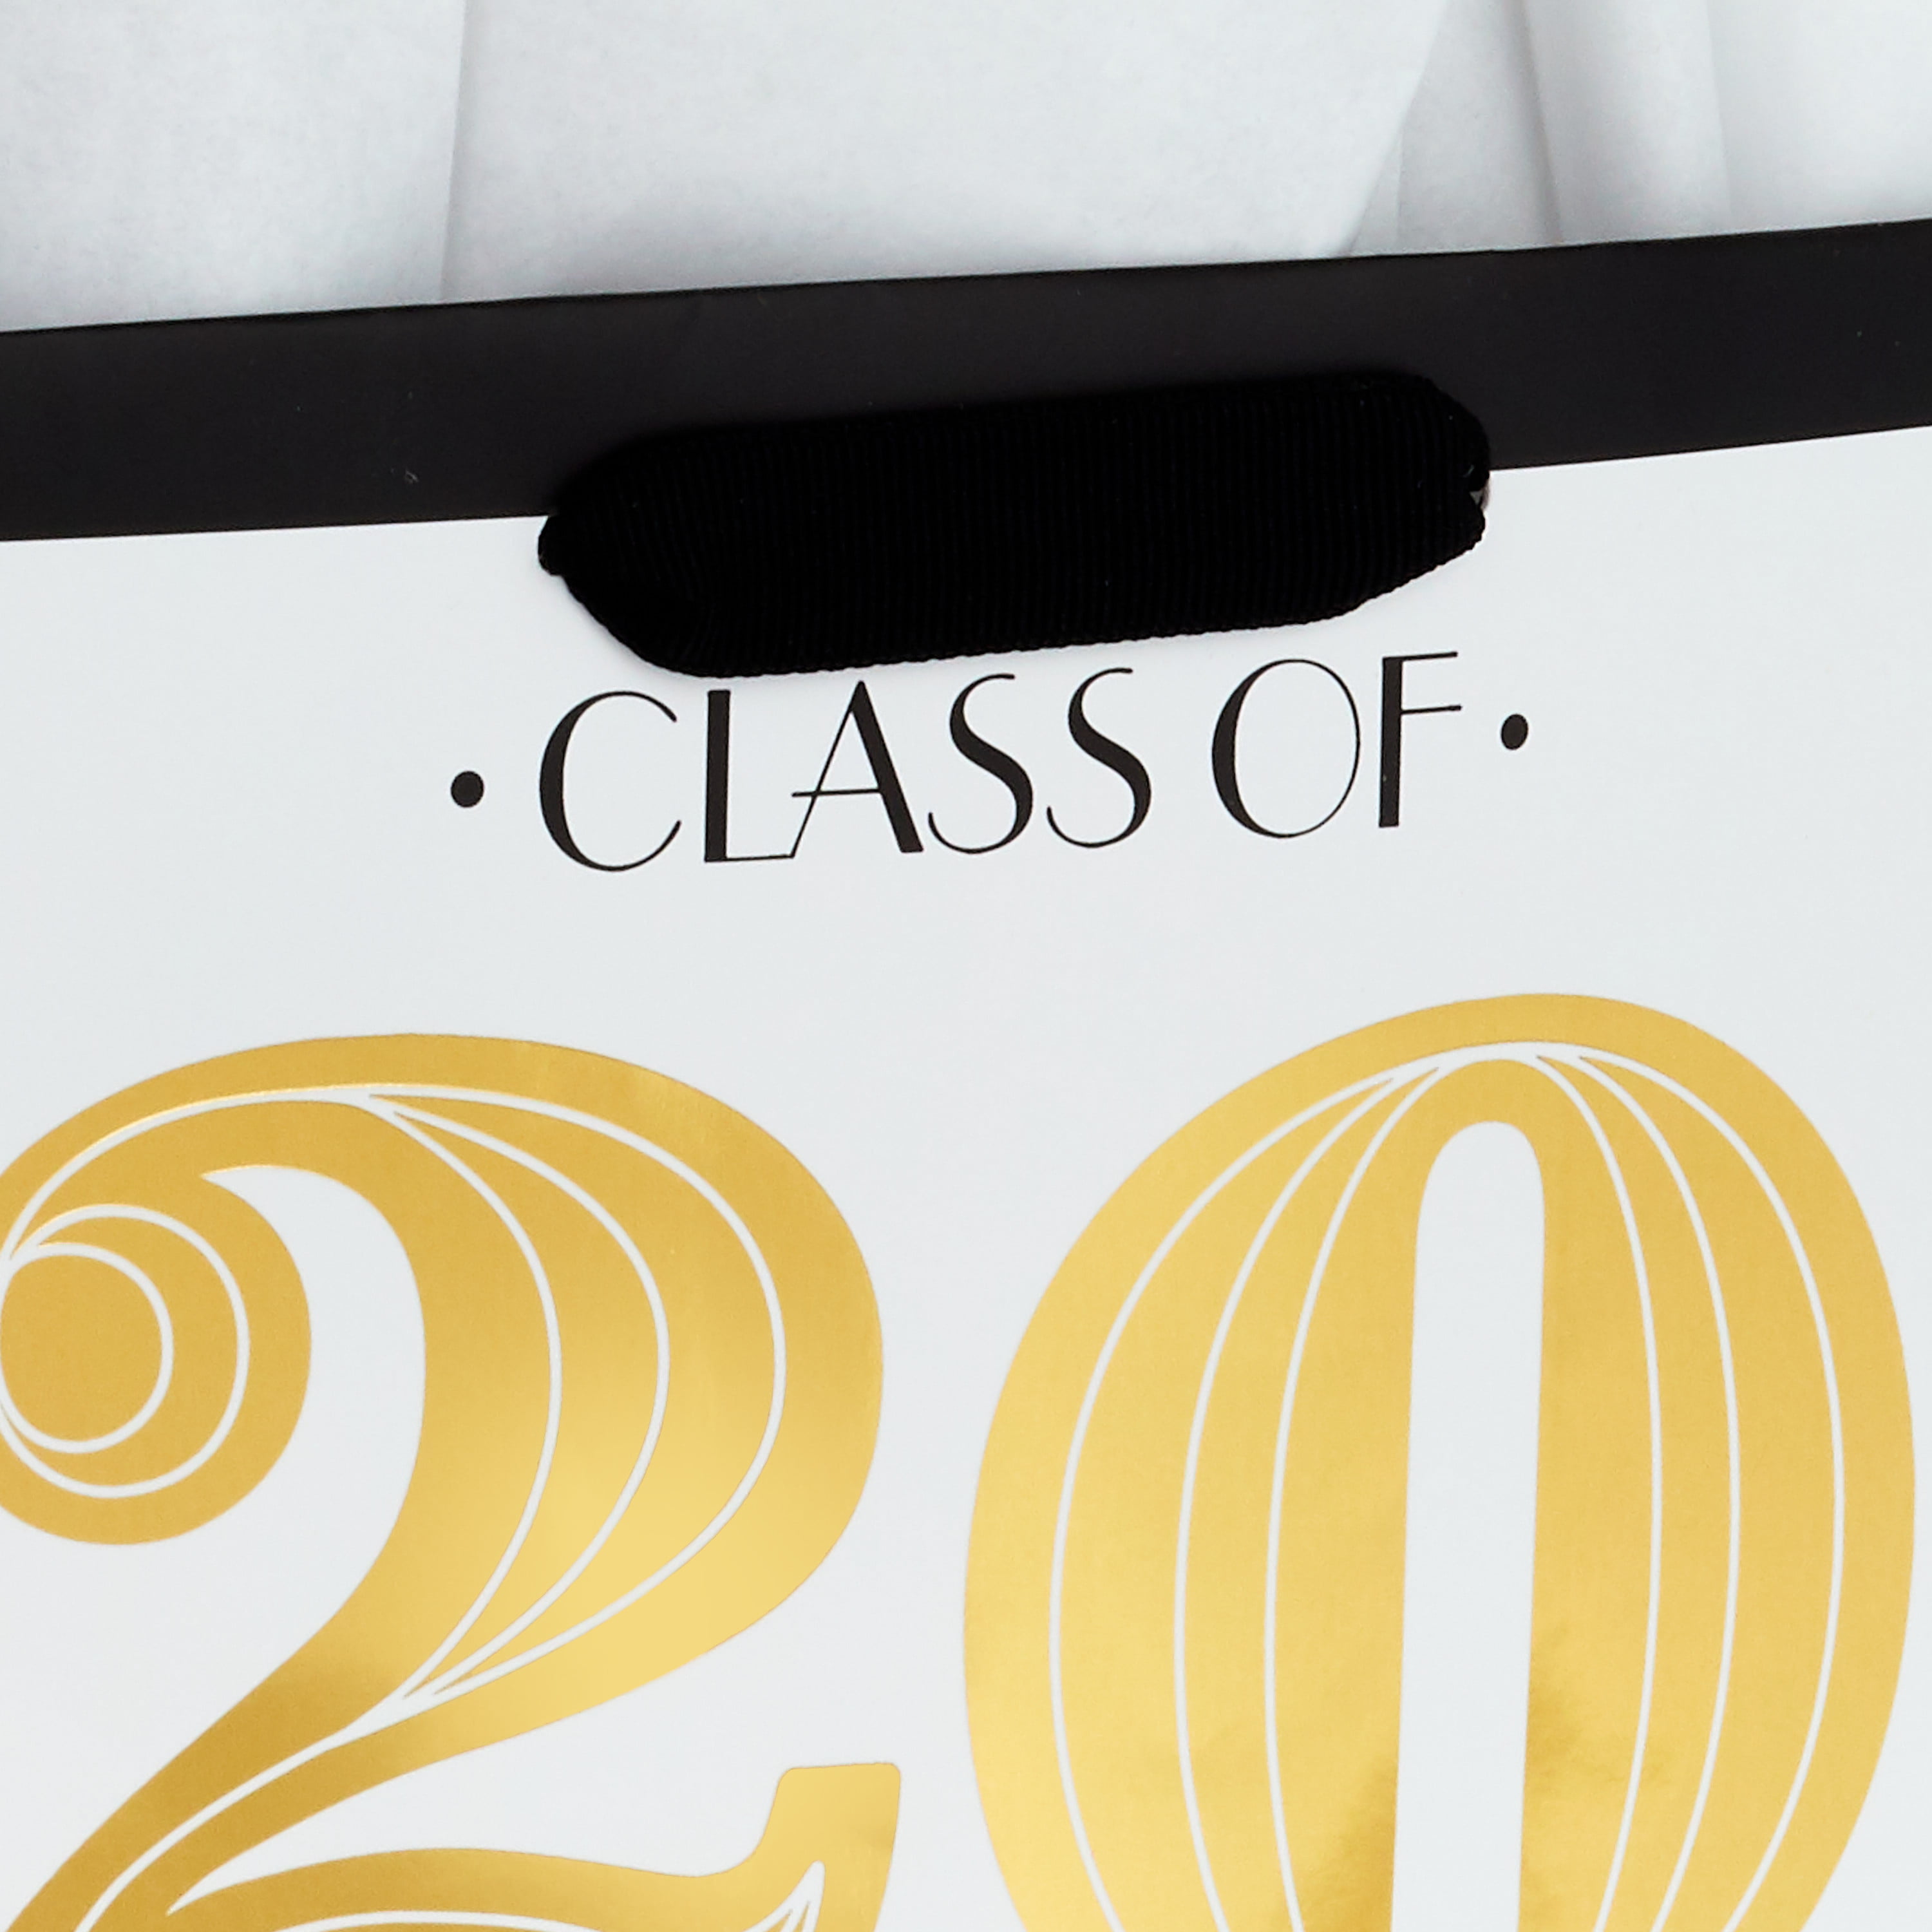 Hallmark 9 Medium Graduation Gift Bag with Tissue Paper (Class of 2023, Tassel, Black, White and Gold) for High School, College, University